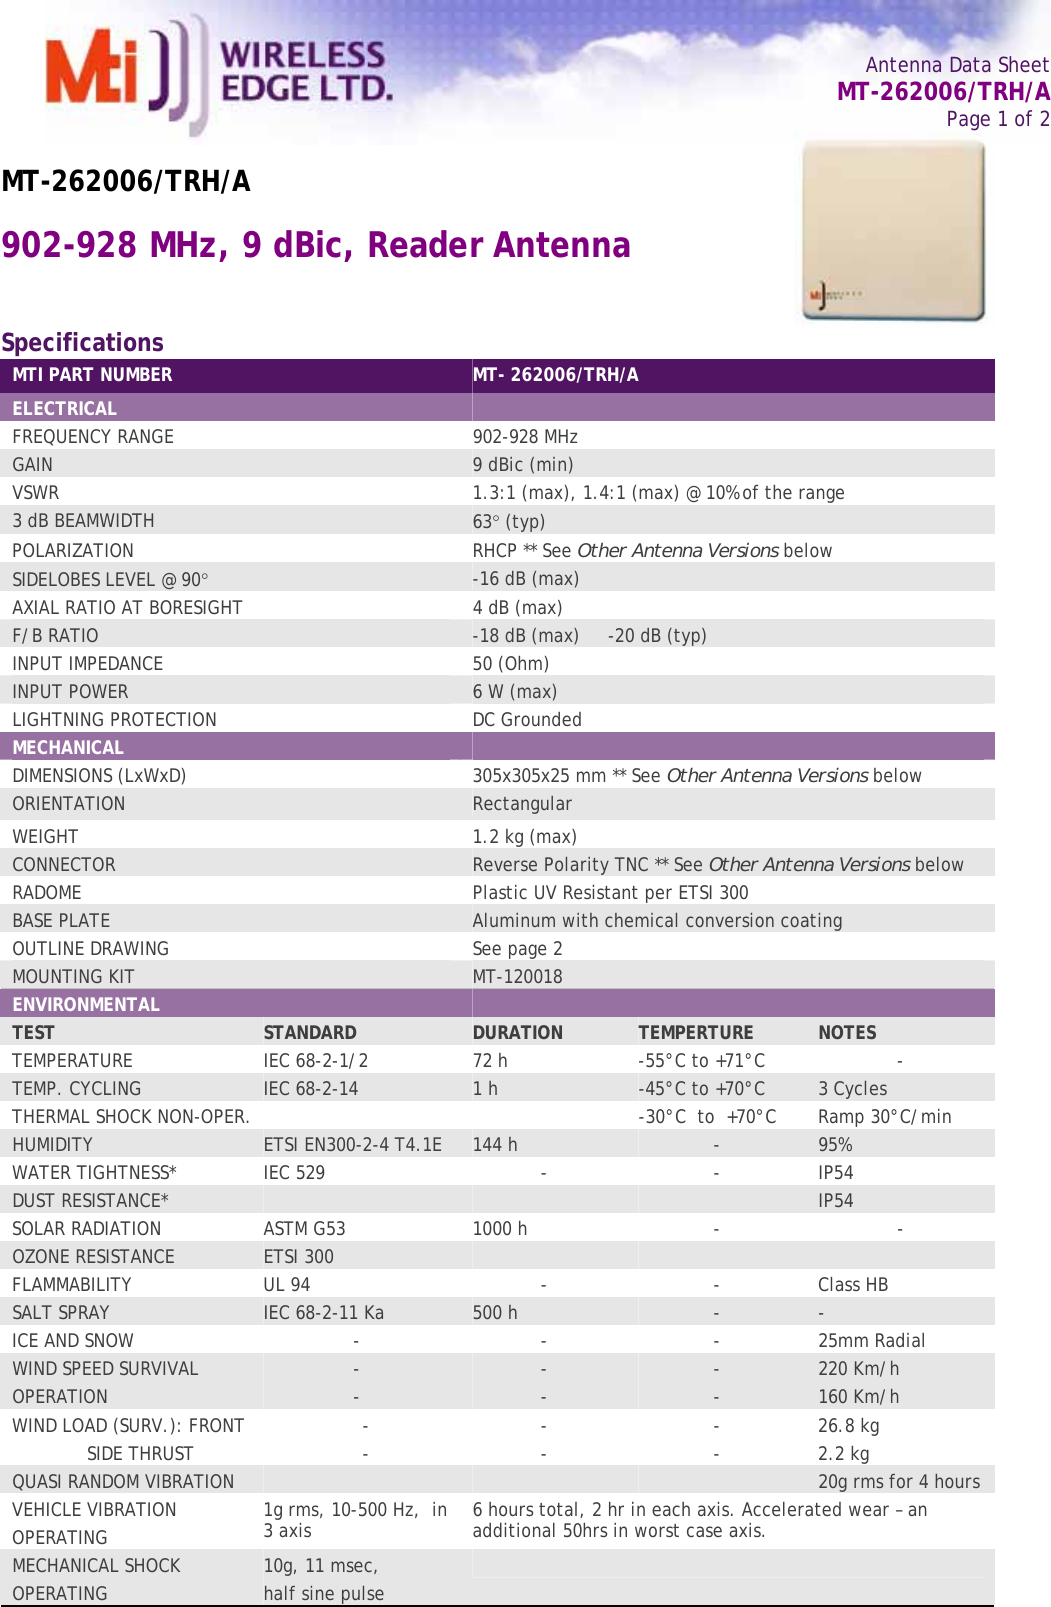   Antenna Data Sheet   MT-262006/TRH/A Page 1 of 2  MT-262006/TRH/A 902-928 MHz, 9 dBic, Reader Antenna  Specifications MTI PART NUMBER  MT- 262006/TRH/A ELECTRICAL   FREQUENCY RANGE   902-928 MHz GAIN   9 dBic (min) VSWR  1.3:1 (max), 1.4:1 (max) @ 10% of the range 3 dB BEAMWIDTH   63° (typ) POLARIZATION  RHCP ** See Other Antenna Versions below SIDELOBES LEVEL @ 90° -16 dB (max) AXIAL RATIO AT BORESIGHT  4 dB (max) F/B RATIO  -18 dB (max)     -20 dB (typ) INPUT IMPEDANCE  50 (Ohm) INPUT POWER  6 W (max) LIGHTNING PROTECTION  DC Grounded MECHANICAL   DIMENSIONS (LxWxD)  305x305x25 mm ** See Other Antenna Versions below ORIENTATION  Rectangular WEIGHT   1.2 kg (max) CONNECTOR  Reverse Polarity TNC ** See Other Antenna Versions below RADOME  Plastic UV Resistant per ETSI 300 BASE PLATE  Aluminum with chemical conversion coating OUTLINE DRAWING  See page 2 MOUNTING KIT  MT-120018 ENVIRONMENTAL   TEST  STANDARD  DURATION  TEMPERTURE  NOTES TEMPERATURE  IEC 68-2-1/2  72 h  -55°C to +71°C  - TEMP. CYCLING  IEC 68-2-14  1 h  -45°C to +70°C    3 Cycles THERMAL SHOCK NON-OPER.    -30°C  to  +70°C    Ramp 30°C/min HUMIDITY  ETSI EN300-2-4 T4.1E  144 h  -  95% WATER TIGHTNESS*  IEC 529  -  -  IP54 DUST RESISTANCE*        IP54 SOLAR RADIATION  ASTM G53  1000 h  -  - OZONE RESISTANCE  ETSI 300       FLAMMABILITY  UL 94  -  -  Class HB SALT SPRAY  IEC 68-2-11 Ka  500 h  -  - ICE AND SNOW  -  -  -  25mm Radial WIND SPEED SURVIVAL OPERATION  - -  - -  - -  220 Km/h 160 Km/h WIND LOAD (SURV.): FRONT   SIDE THRUST  - -  - -  - -  26.8 kg 2.2 kg QUASI RANDOM VIBRATION        20g rms for 4 hours VEHICLE VIBRATION OPERATING  1g rms, 10-500 Hz,  in 3 axis  6 hours total, 2 hr in each axis. Accelerated wear – an additional 50hrs in worst case axis. MECHANICAL SHOCK OPERATING  10g, 11 msec, half sine pulse         